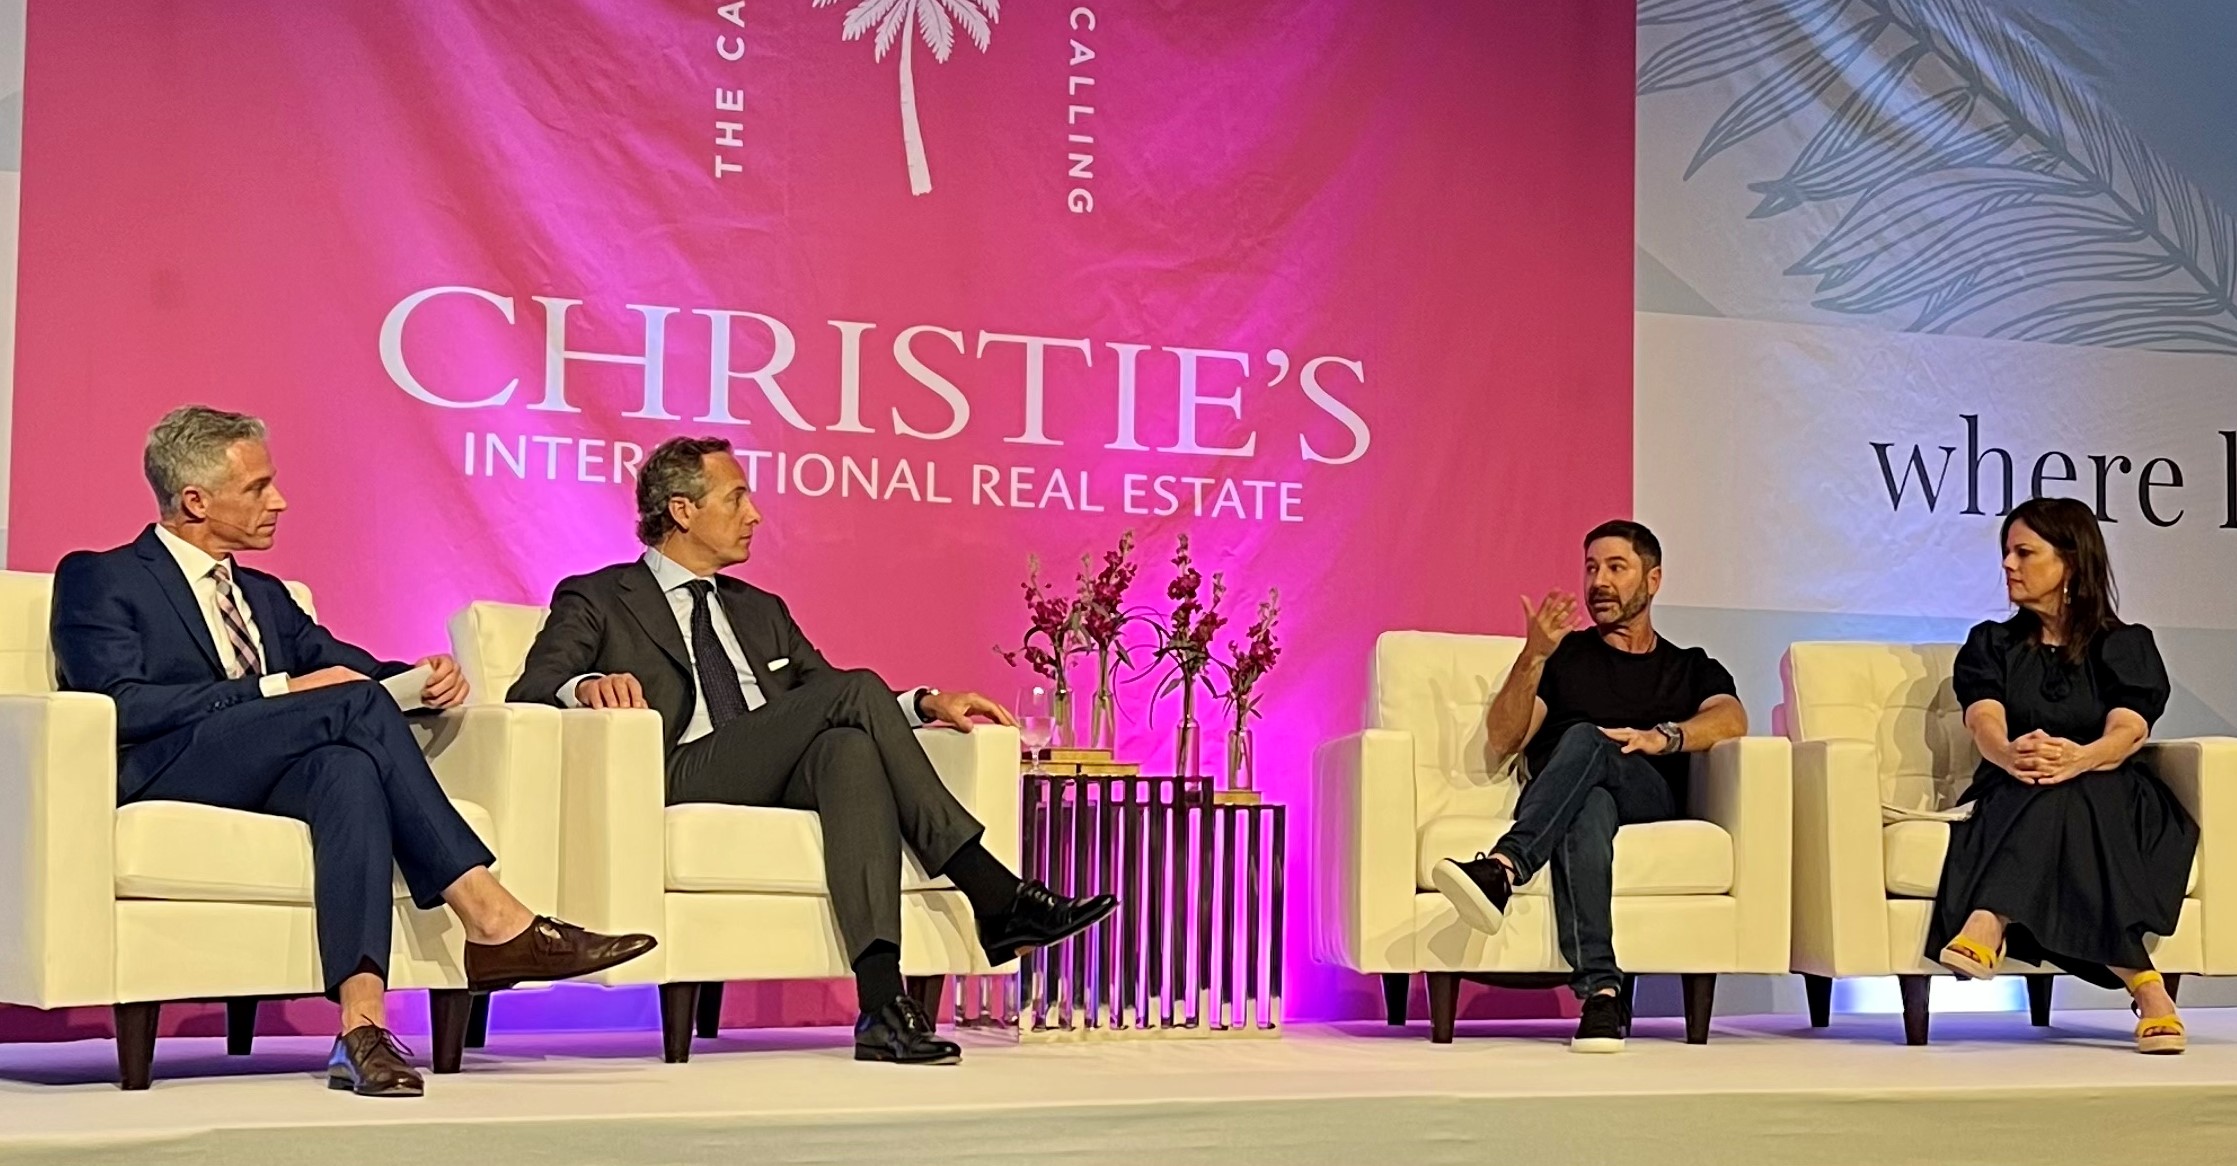 Brokerages from 20 Countries and Territories Gathered in the Cayman Islands For Christie’s International Real Estate’s Annual Owners Conference | CHRISTIE’S International Real Estate